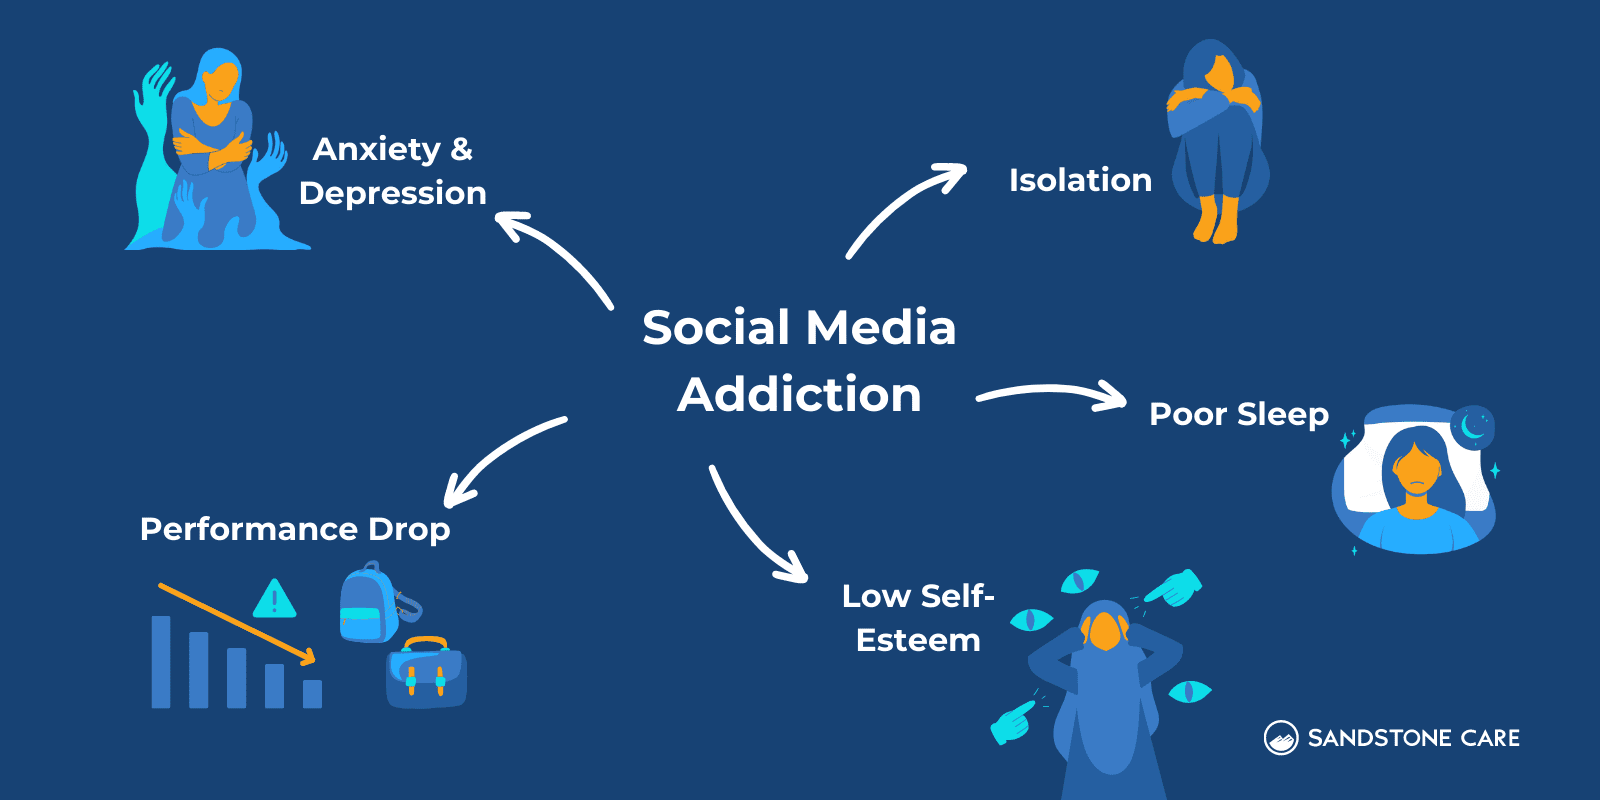 5 Effects of Social Media Addiction illustrated in a mind-map style chart while all the effects are represented with relevant digital graphic